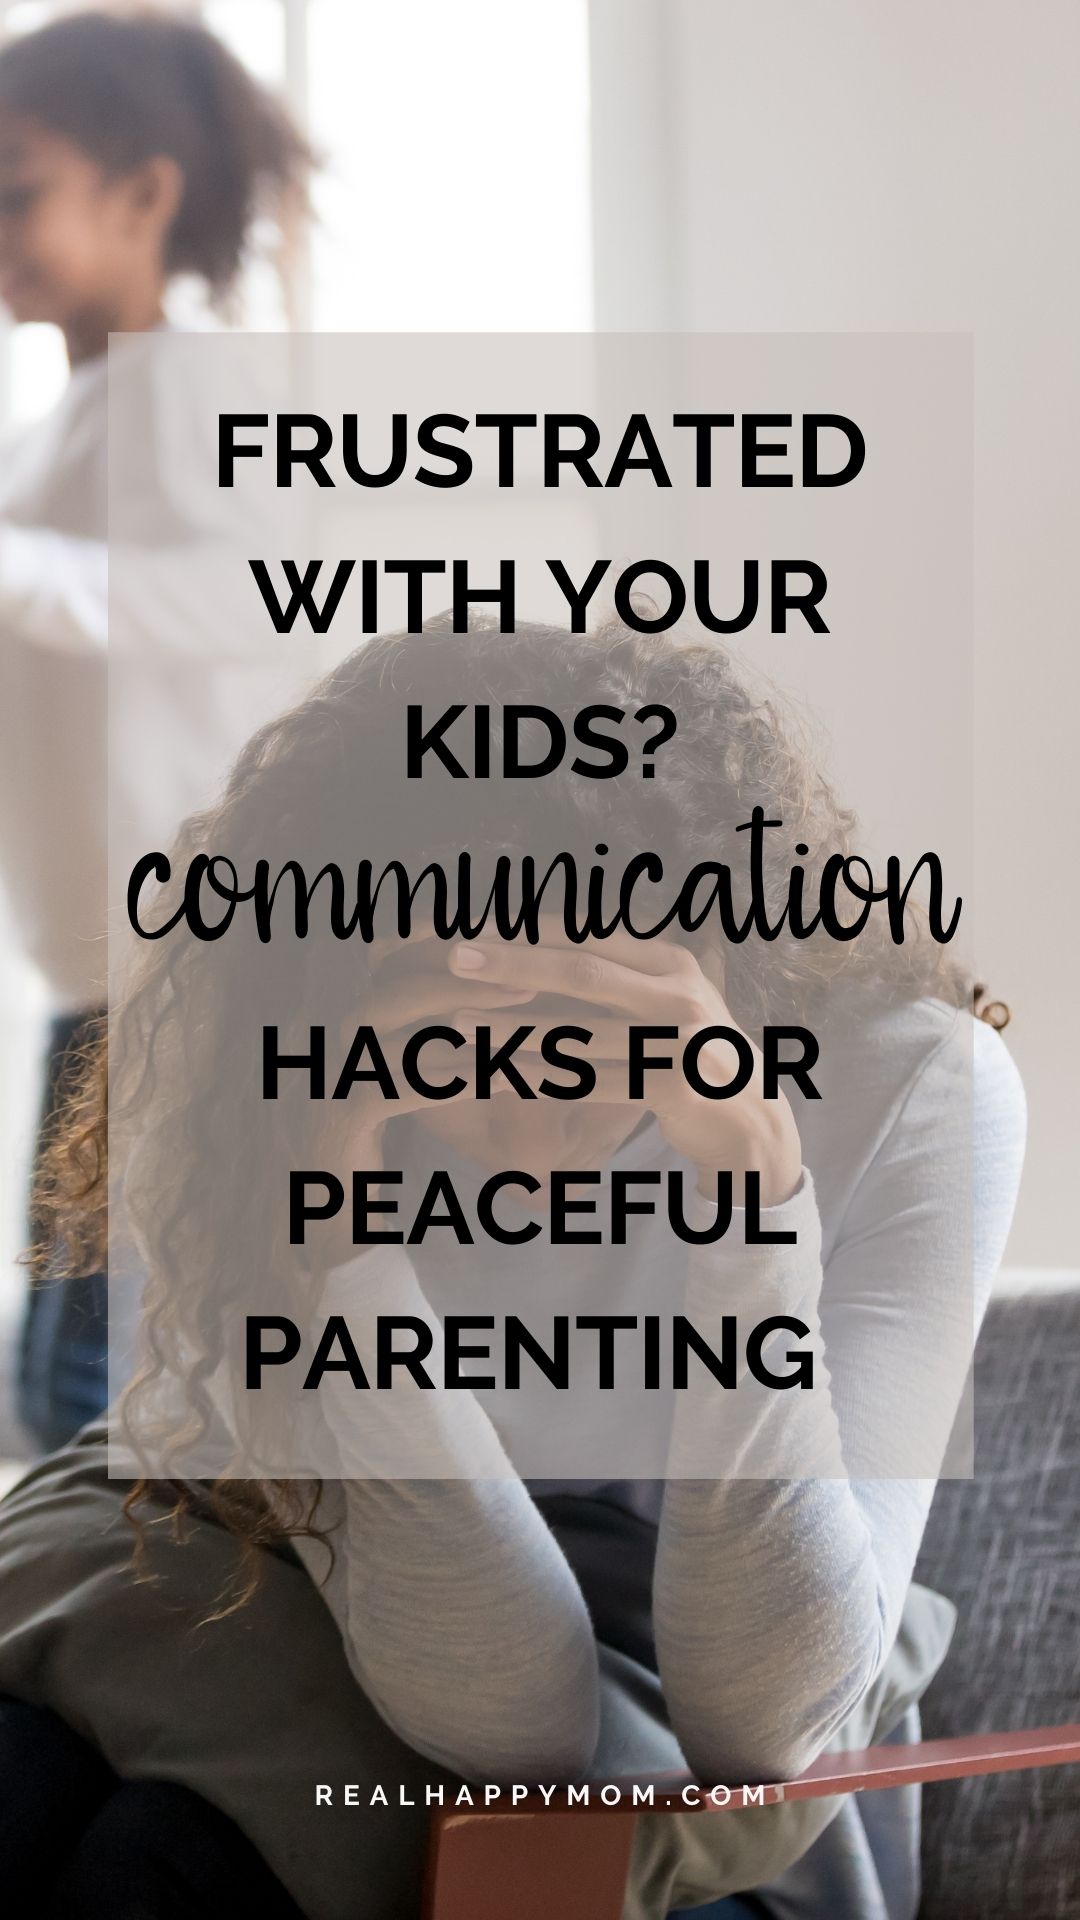 Frustrated with Your Kids? 3 Communication Hacks for Peaceful Parenting